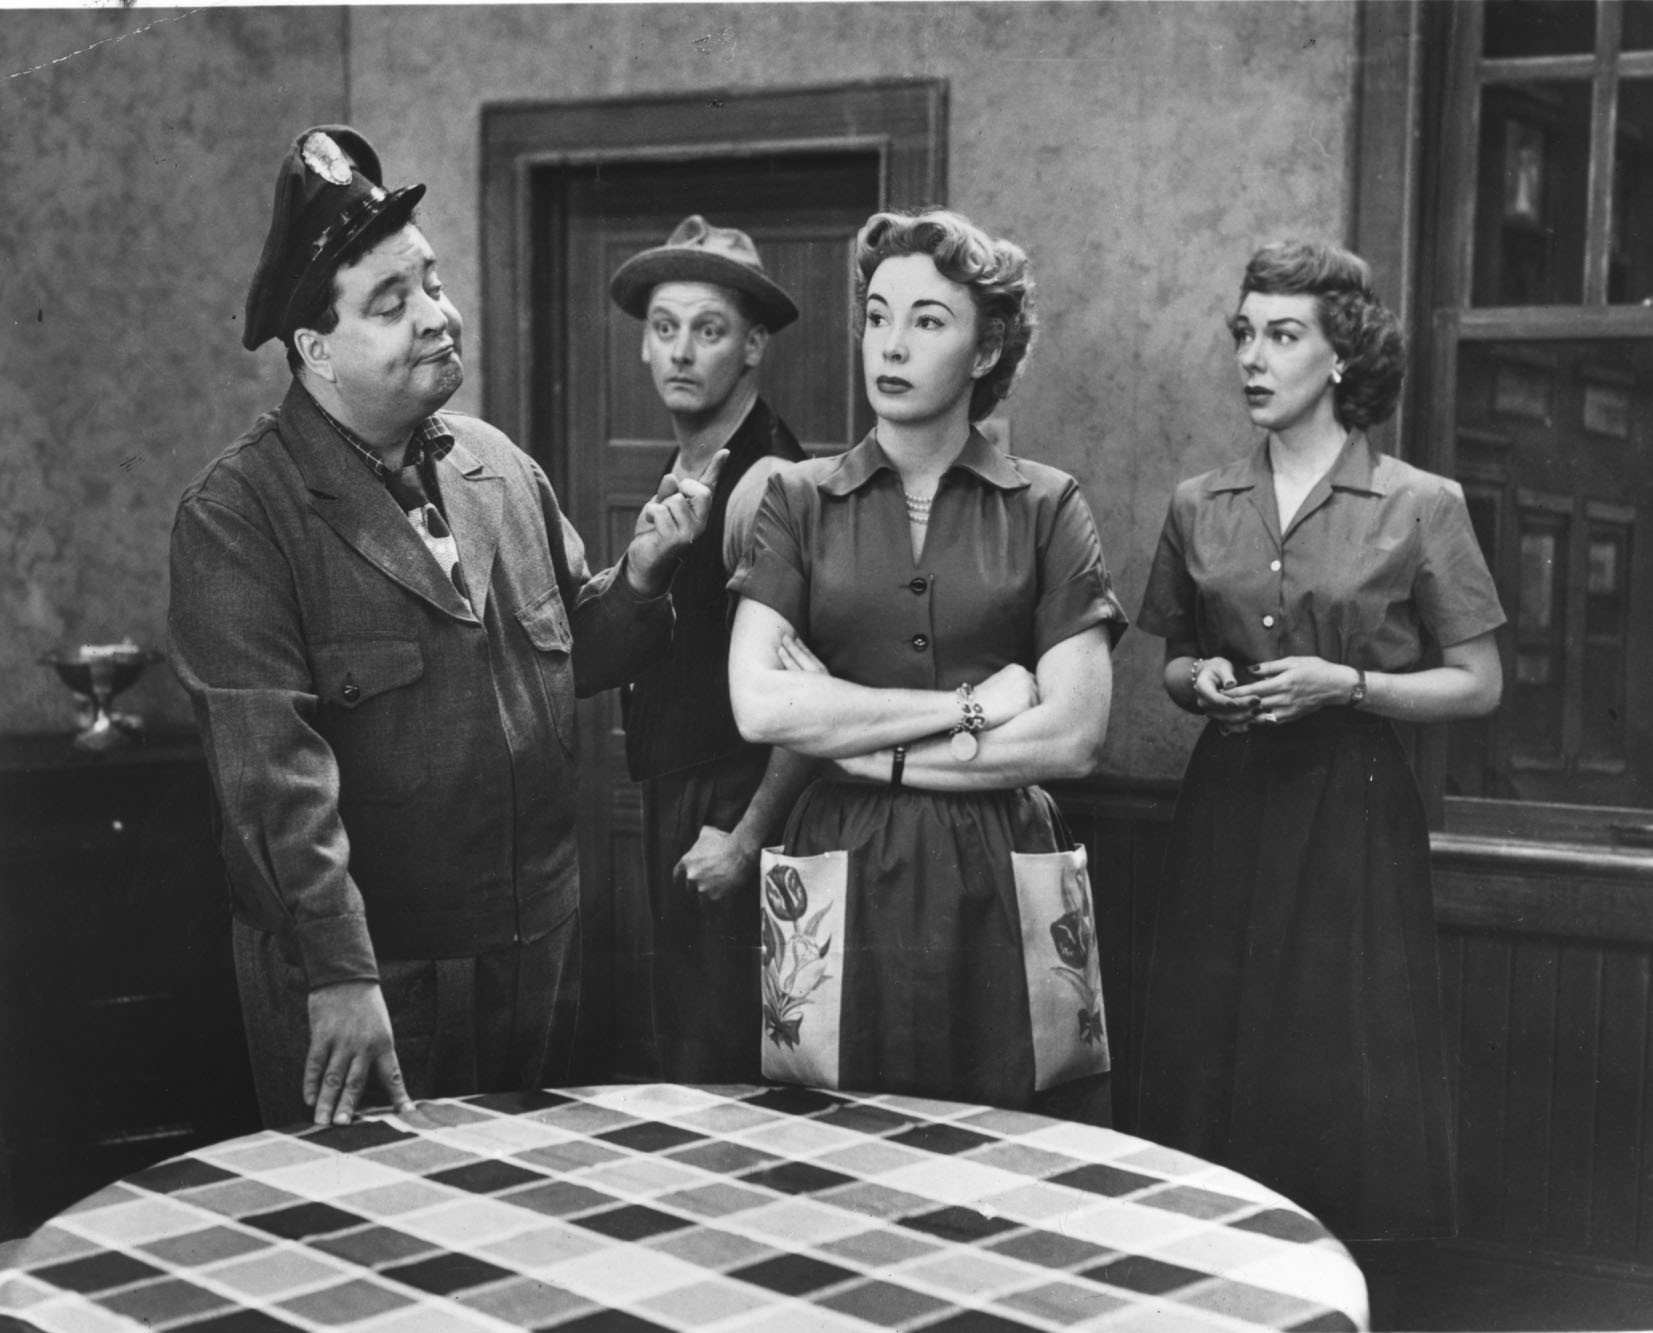 CBS going back 'to the moon' with 'Honeymooners' reboot - LA Times